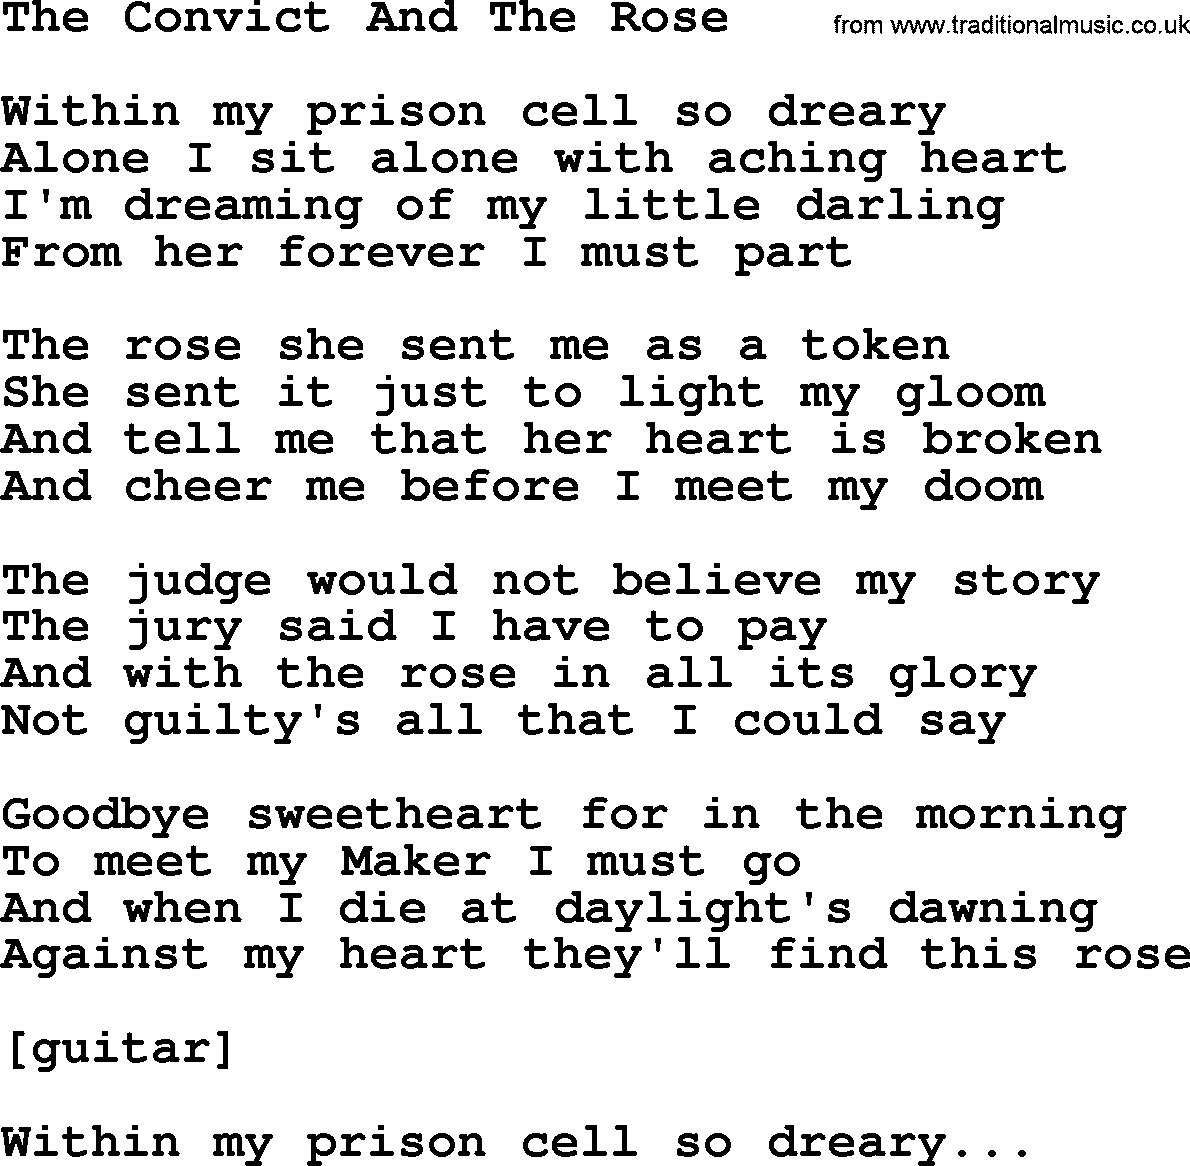 Willie Nelson song: The Convict And The Rose lyrics